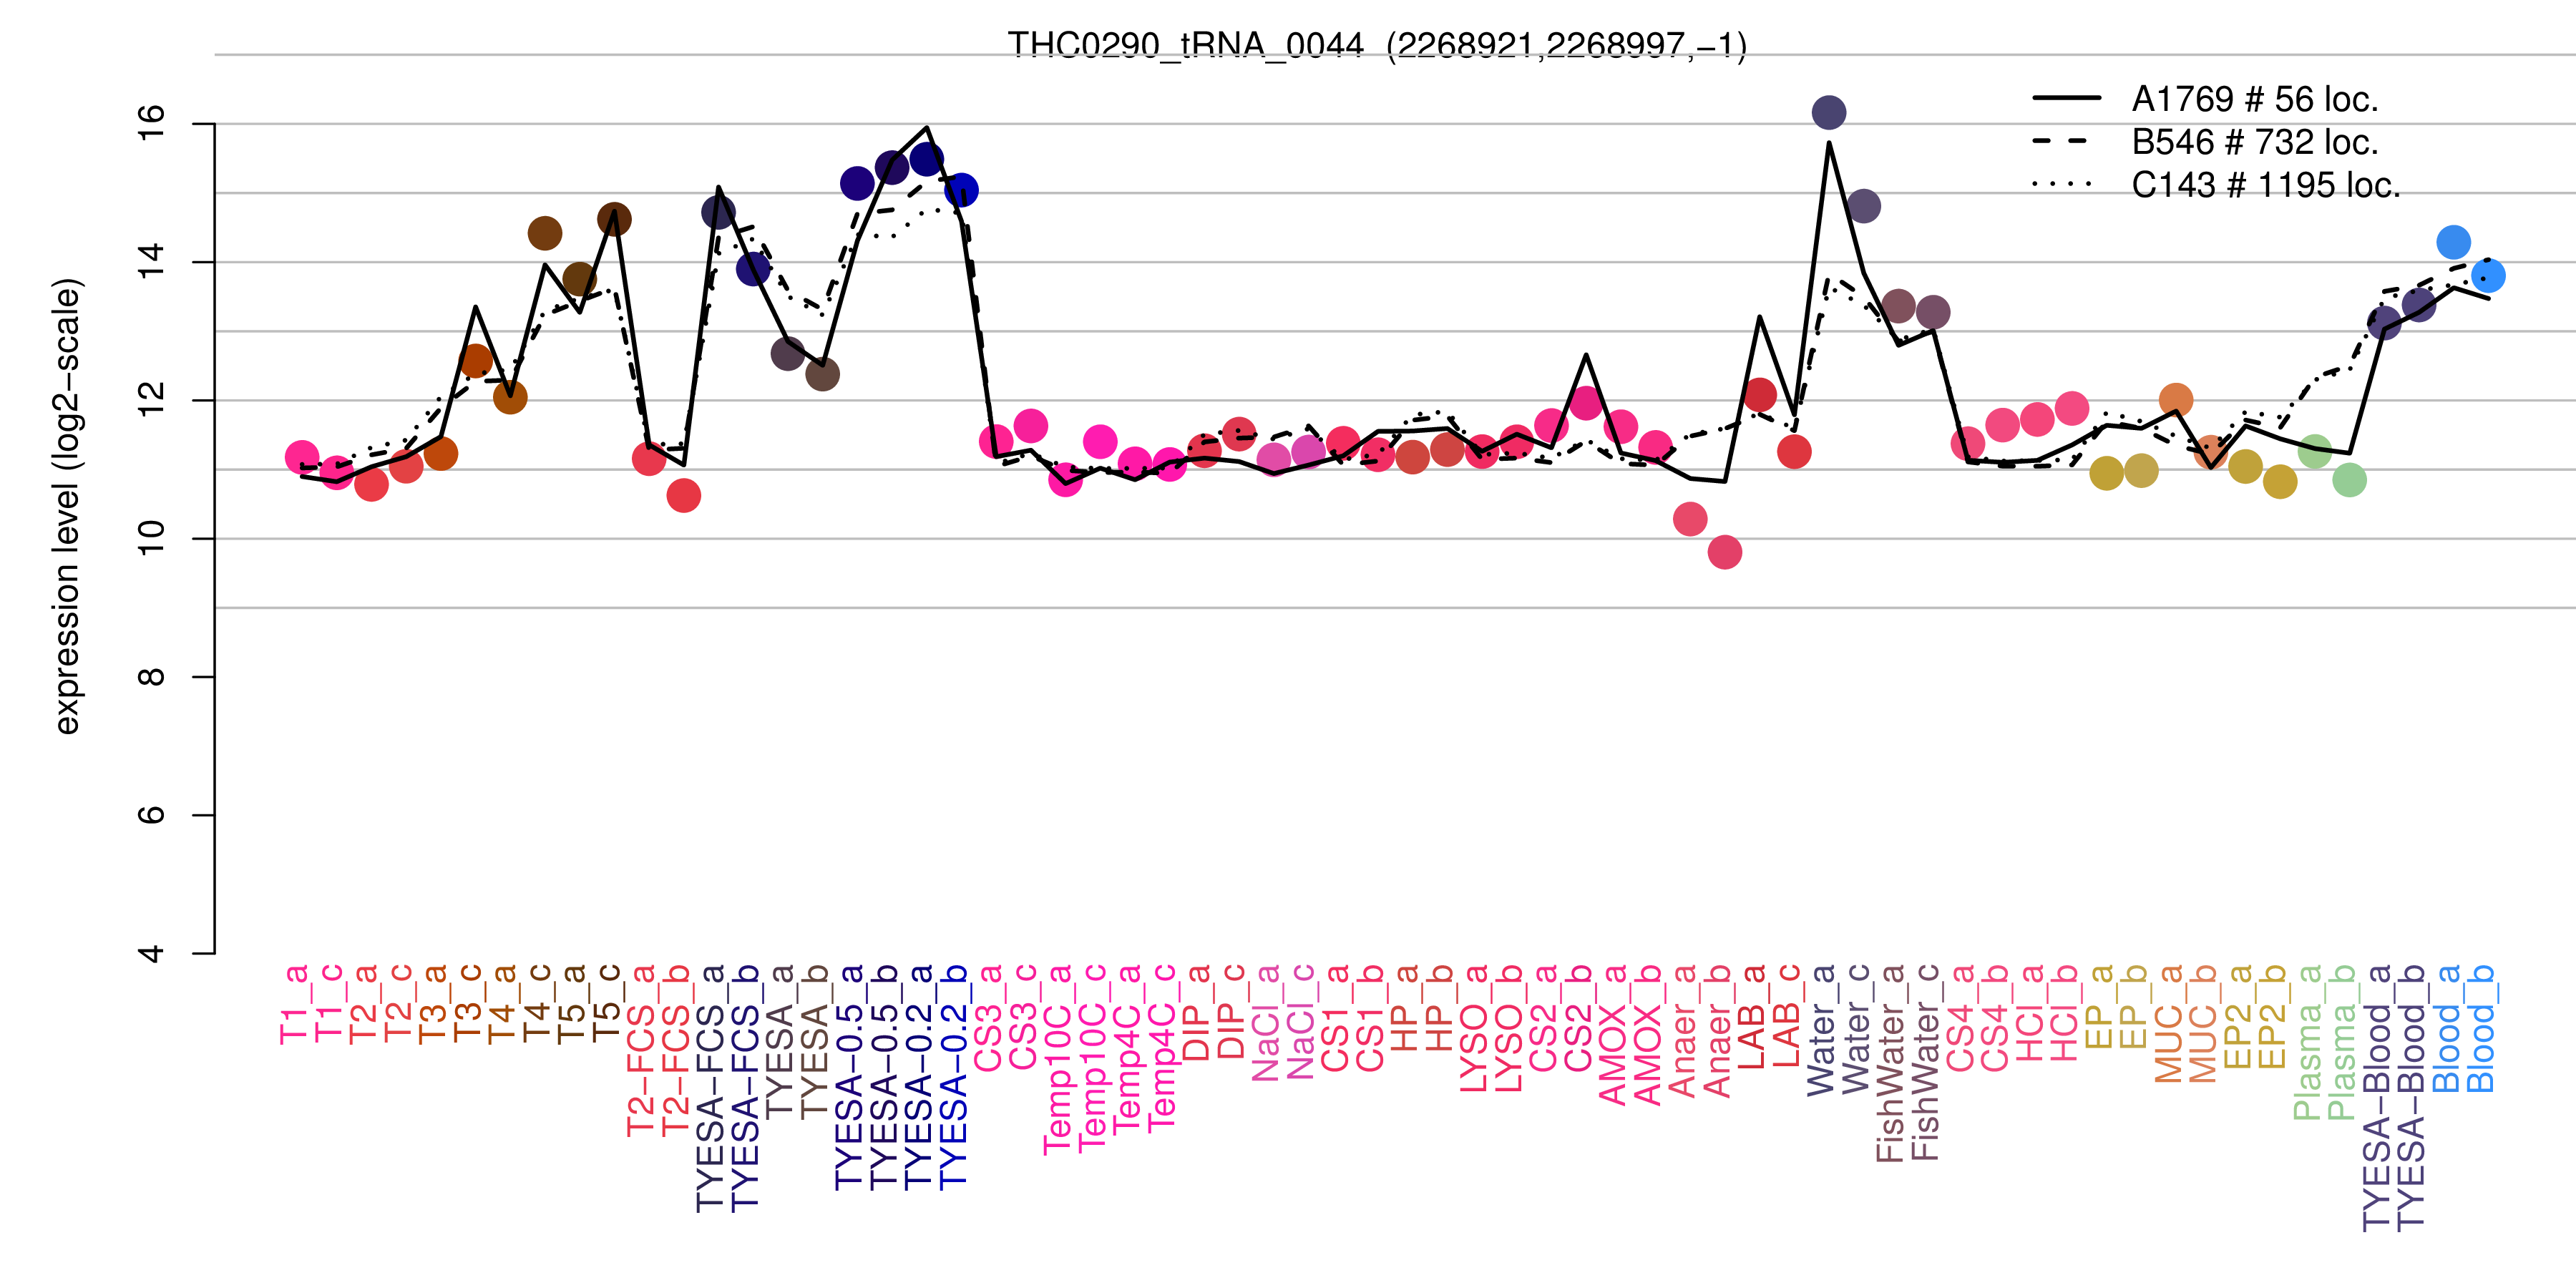 THC0290_tRNA_0044 expression levels among conditions